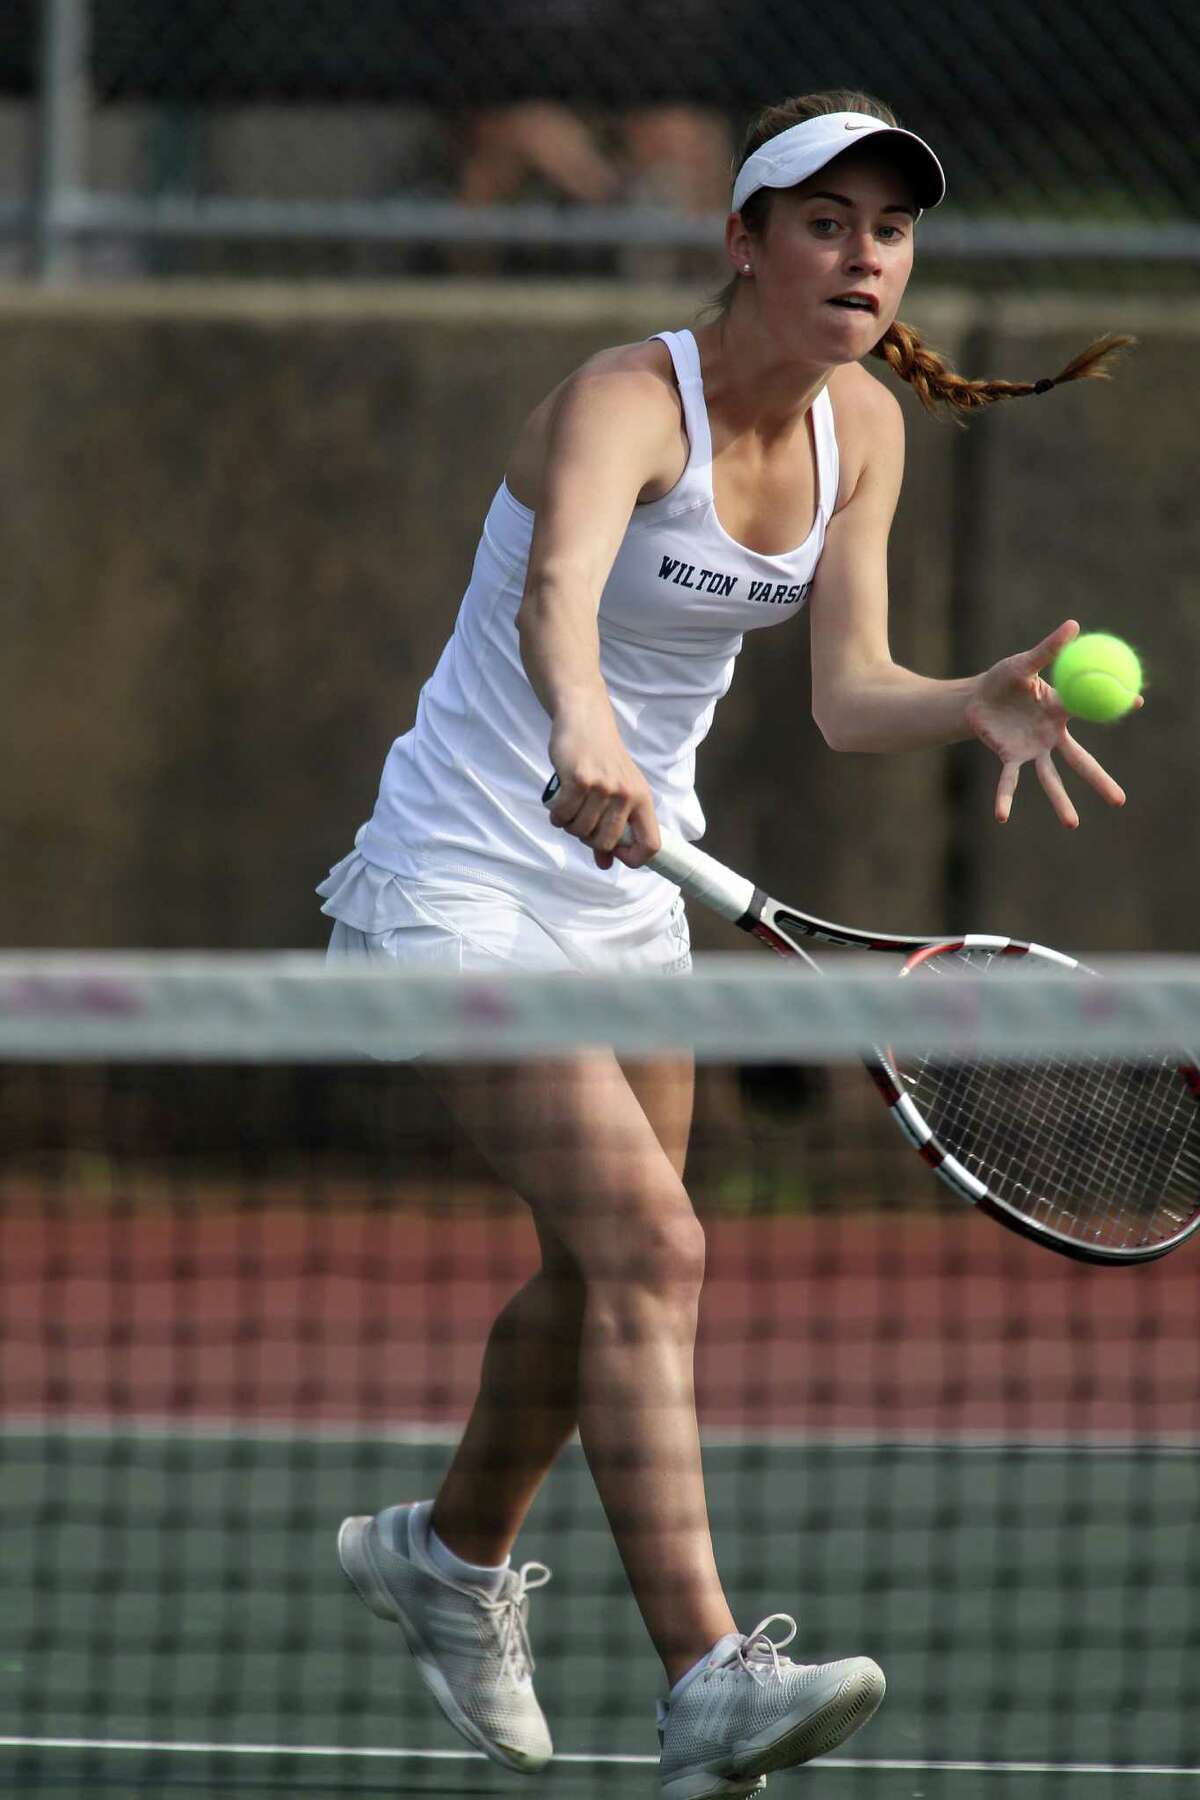 Maddie Stow of Wilton returns a volley during her FCIAC tennis match in Greenwich, Conn. on Wednesday, May 21, 2014.